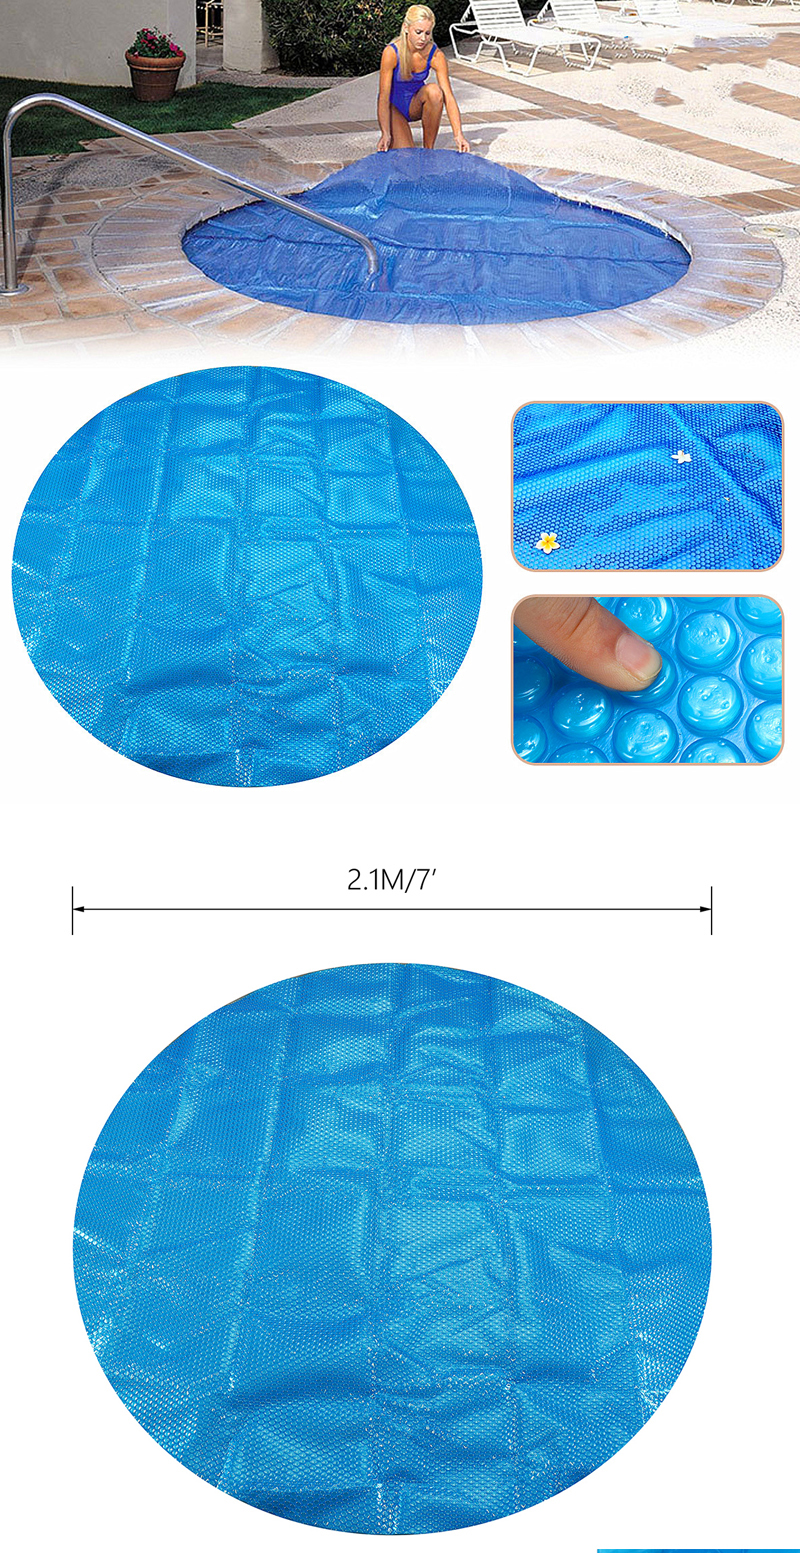 7x7ft-Round-Hot-Tub-Heat-Retention-Cover-Heat-Retention-Bubble-SPA-Thermal-Blanket-1420943-1